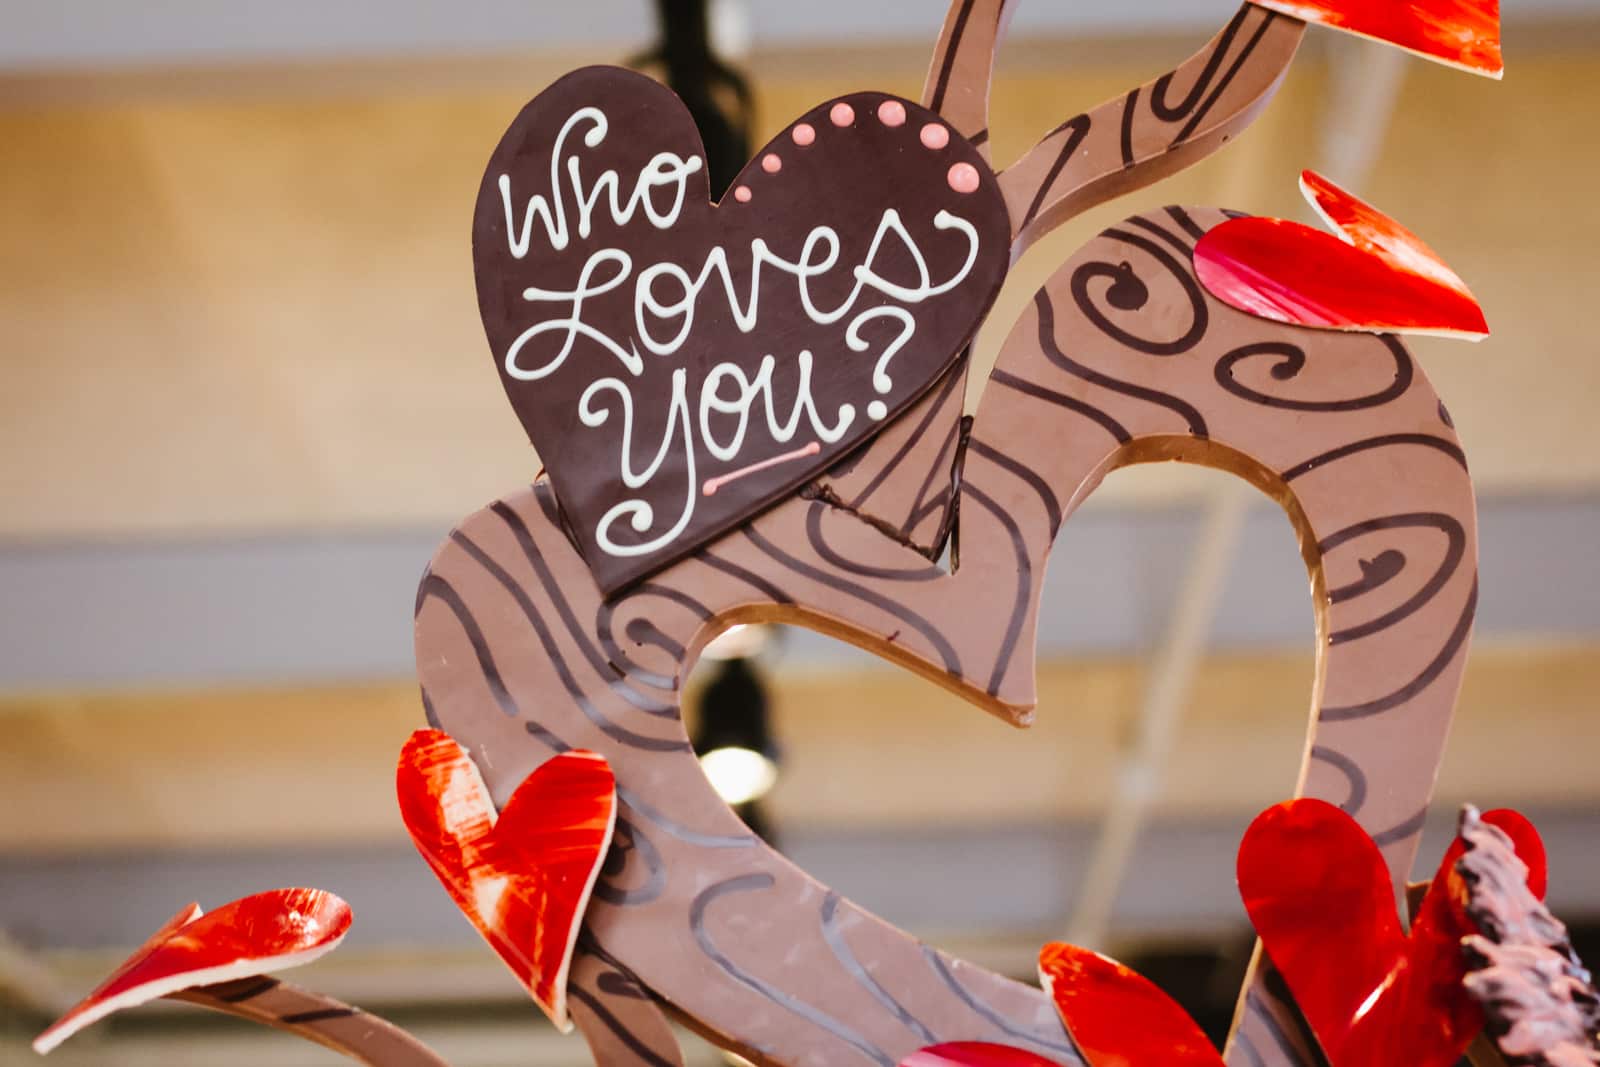 Who Loves You? graphics